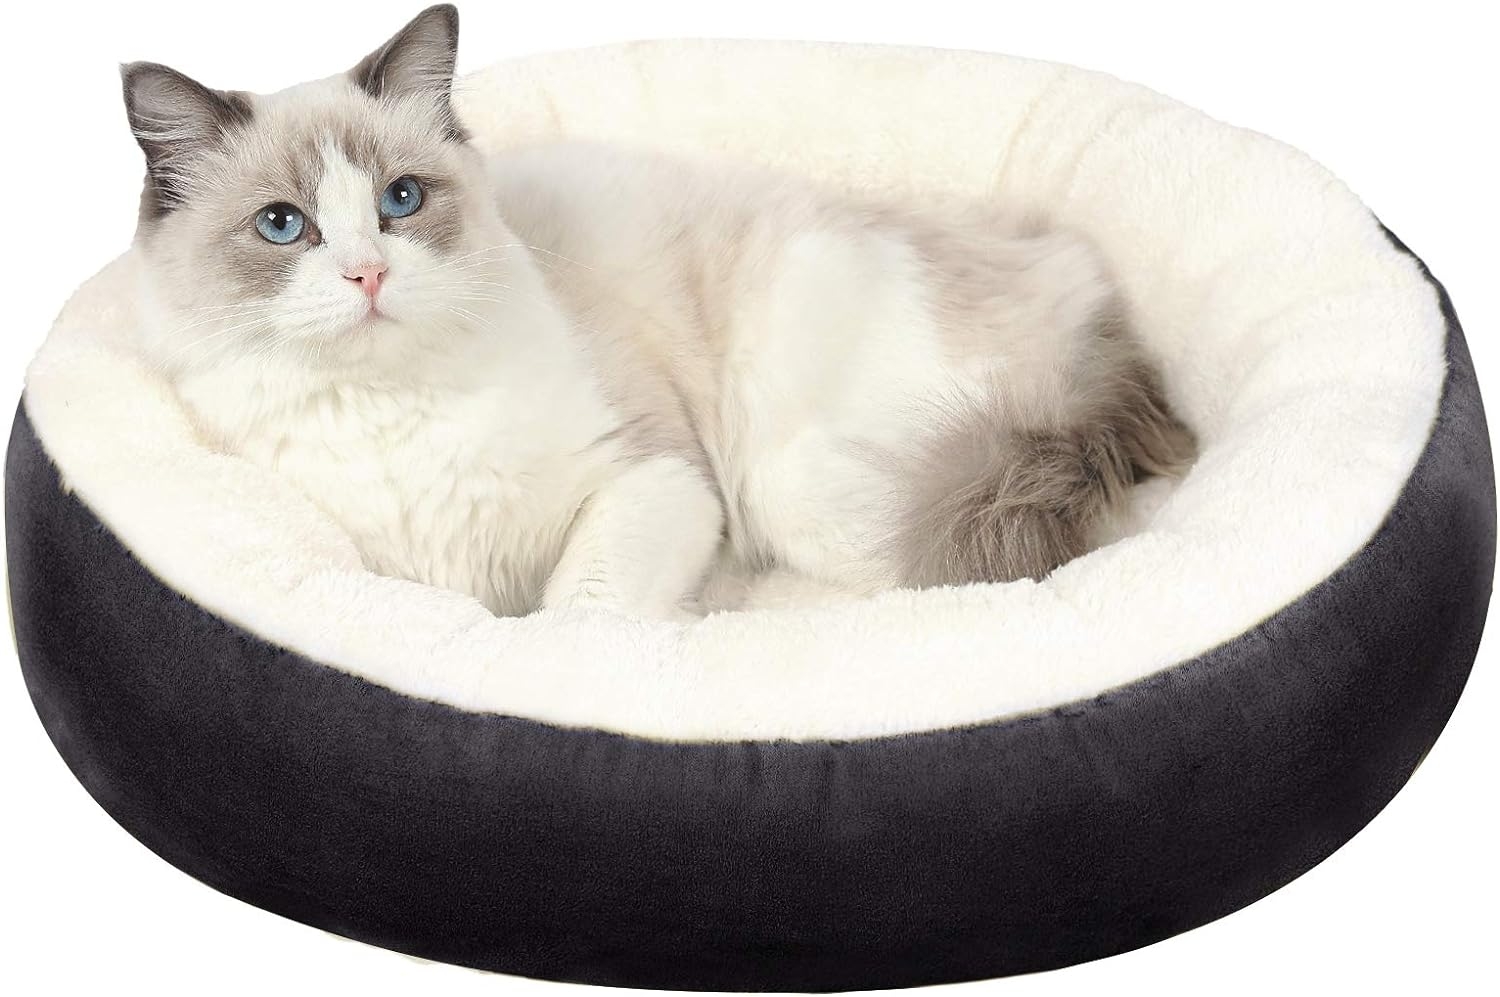 EDUJIN Warming Donut Cushion Cat Bed & Dog Bed, Calming Pup Dog Cat Bed for Small Medium Pet, Non-Slip Bottom, Machine Washable Round Warm Bed for Dogs with Fluffy Comfy Lining Plush Kennel(20",24")